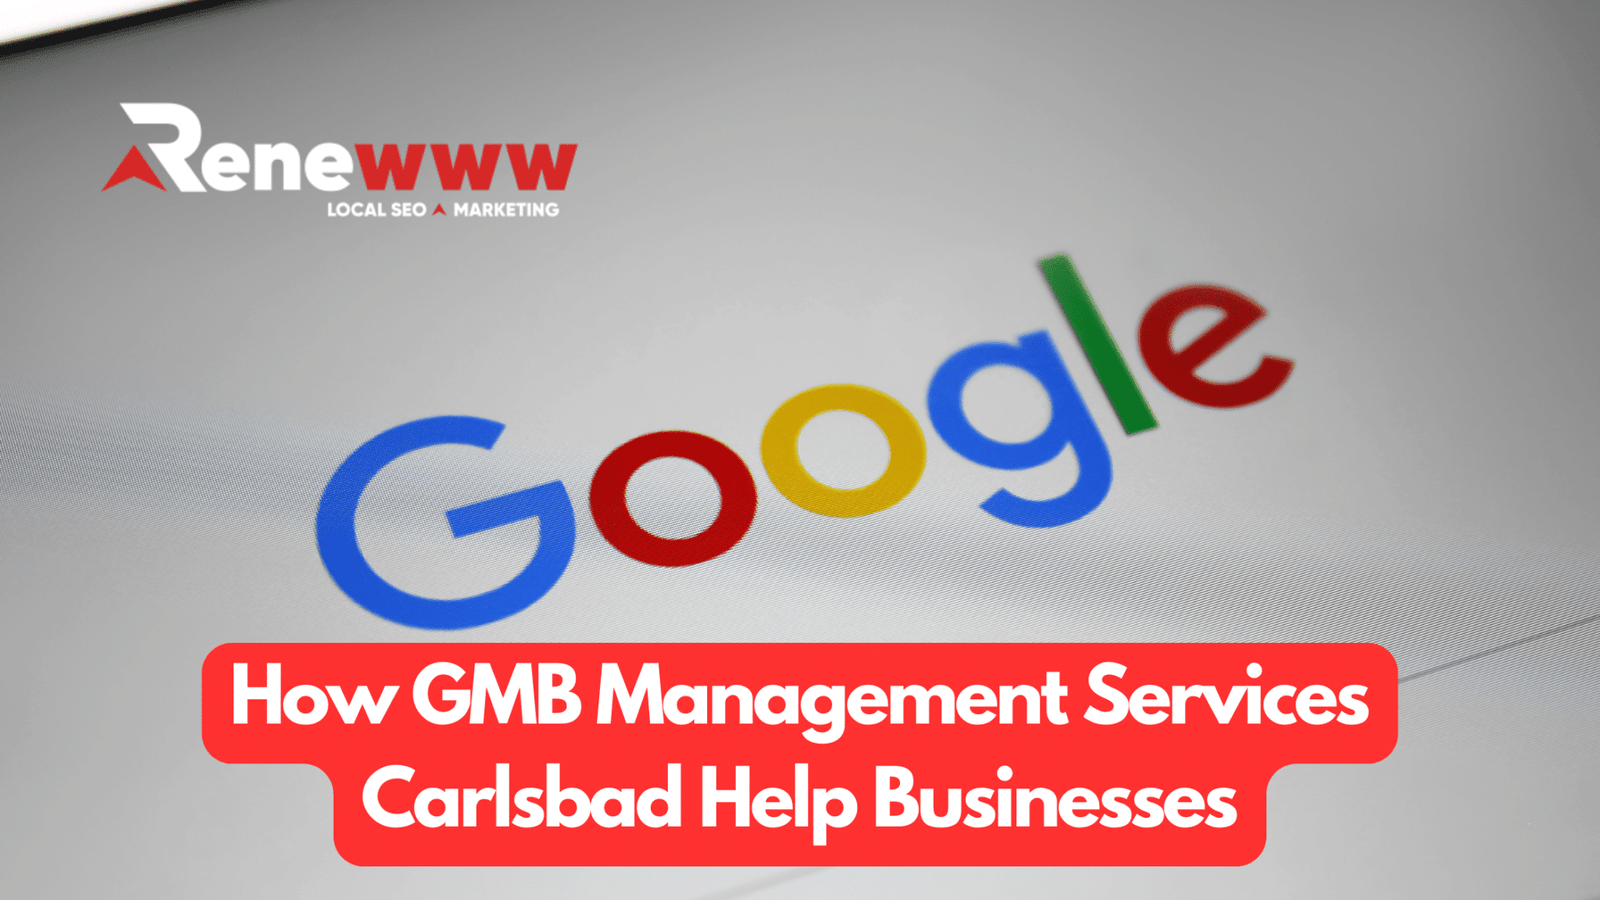 How GMB Management Services Carlsbad Help Businesses